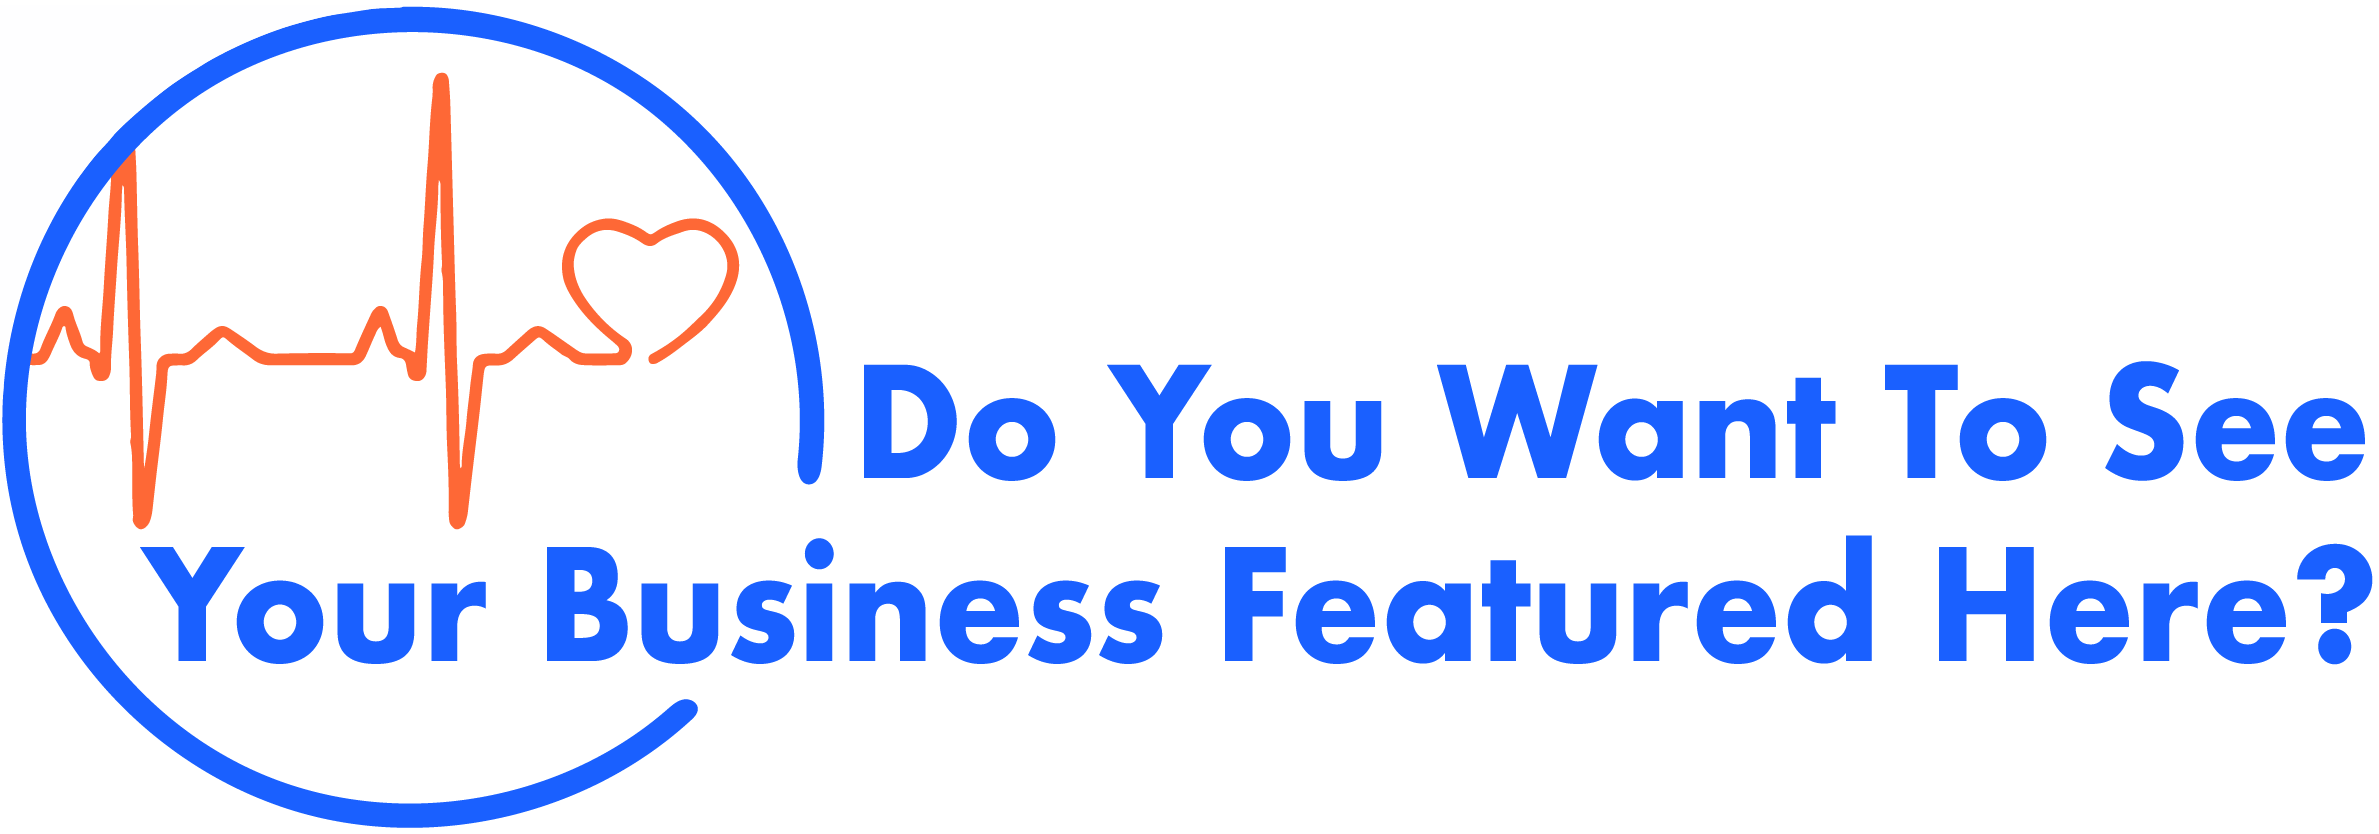 Do you want to see your business featured here?